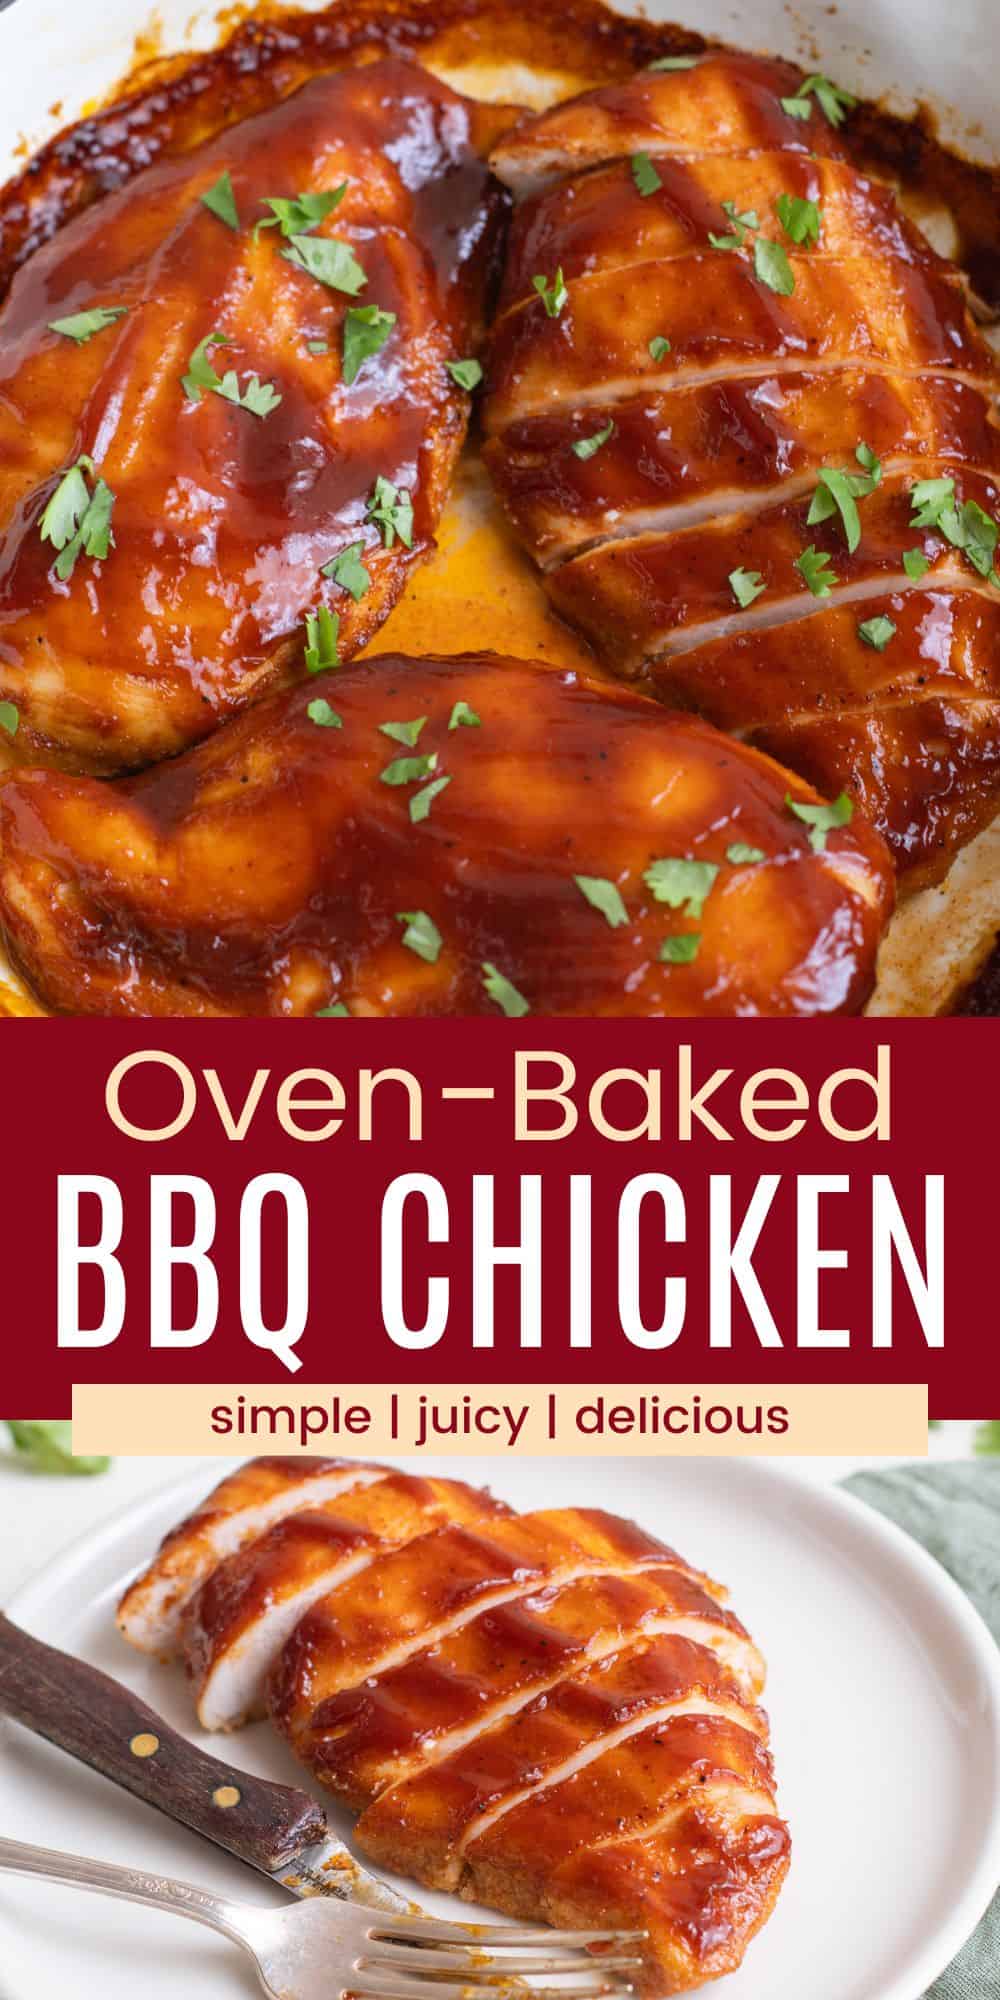 Baked BBQ Chicken Breasts - no grill needed! | Cupcakes & Kale Chips